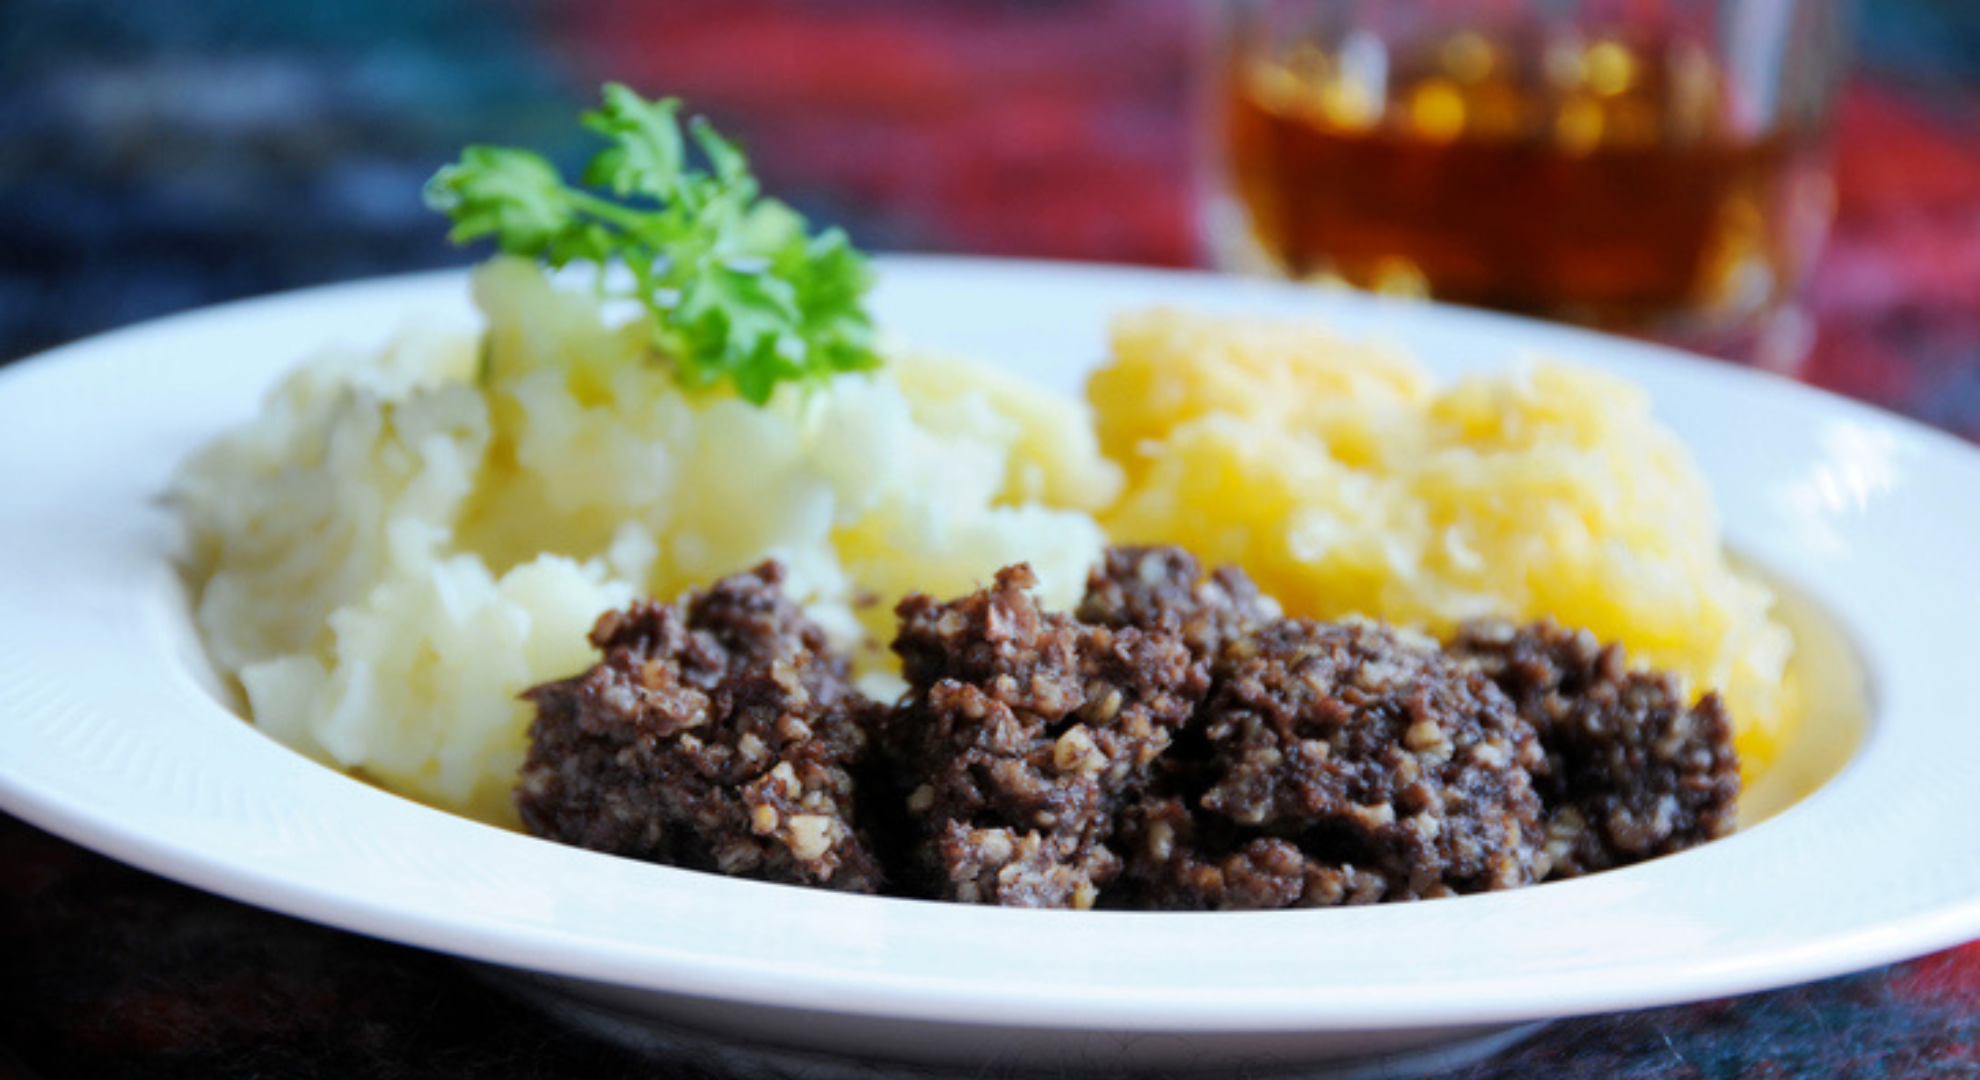 Scottish meal of Haggis, neeps and tatties - and of course a wee dram